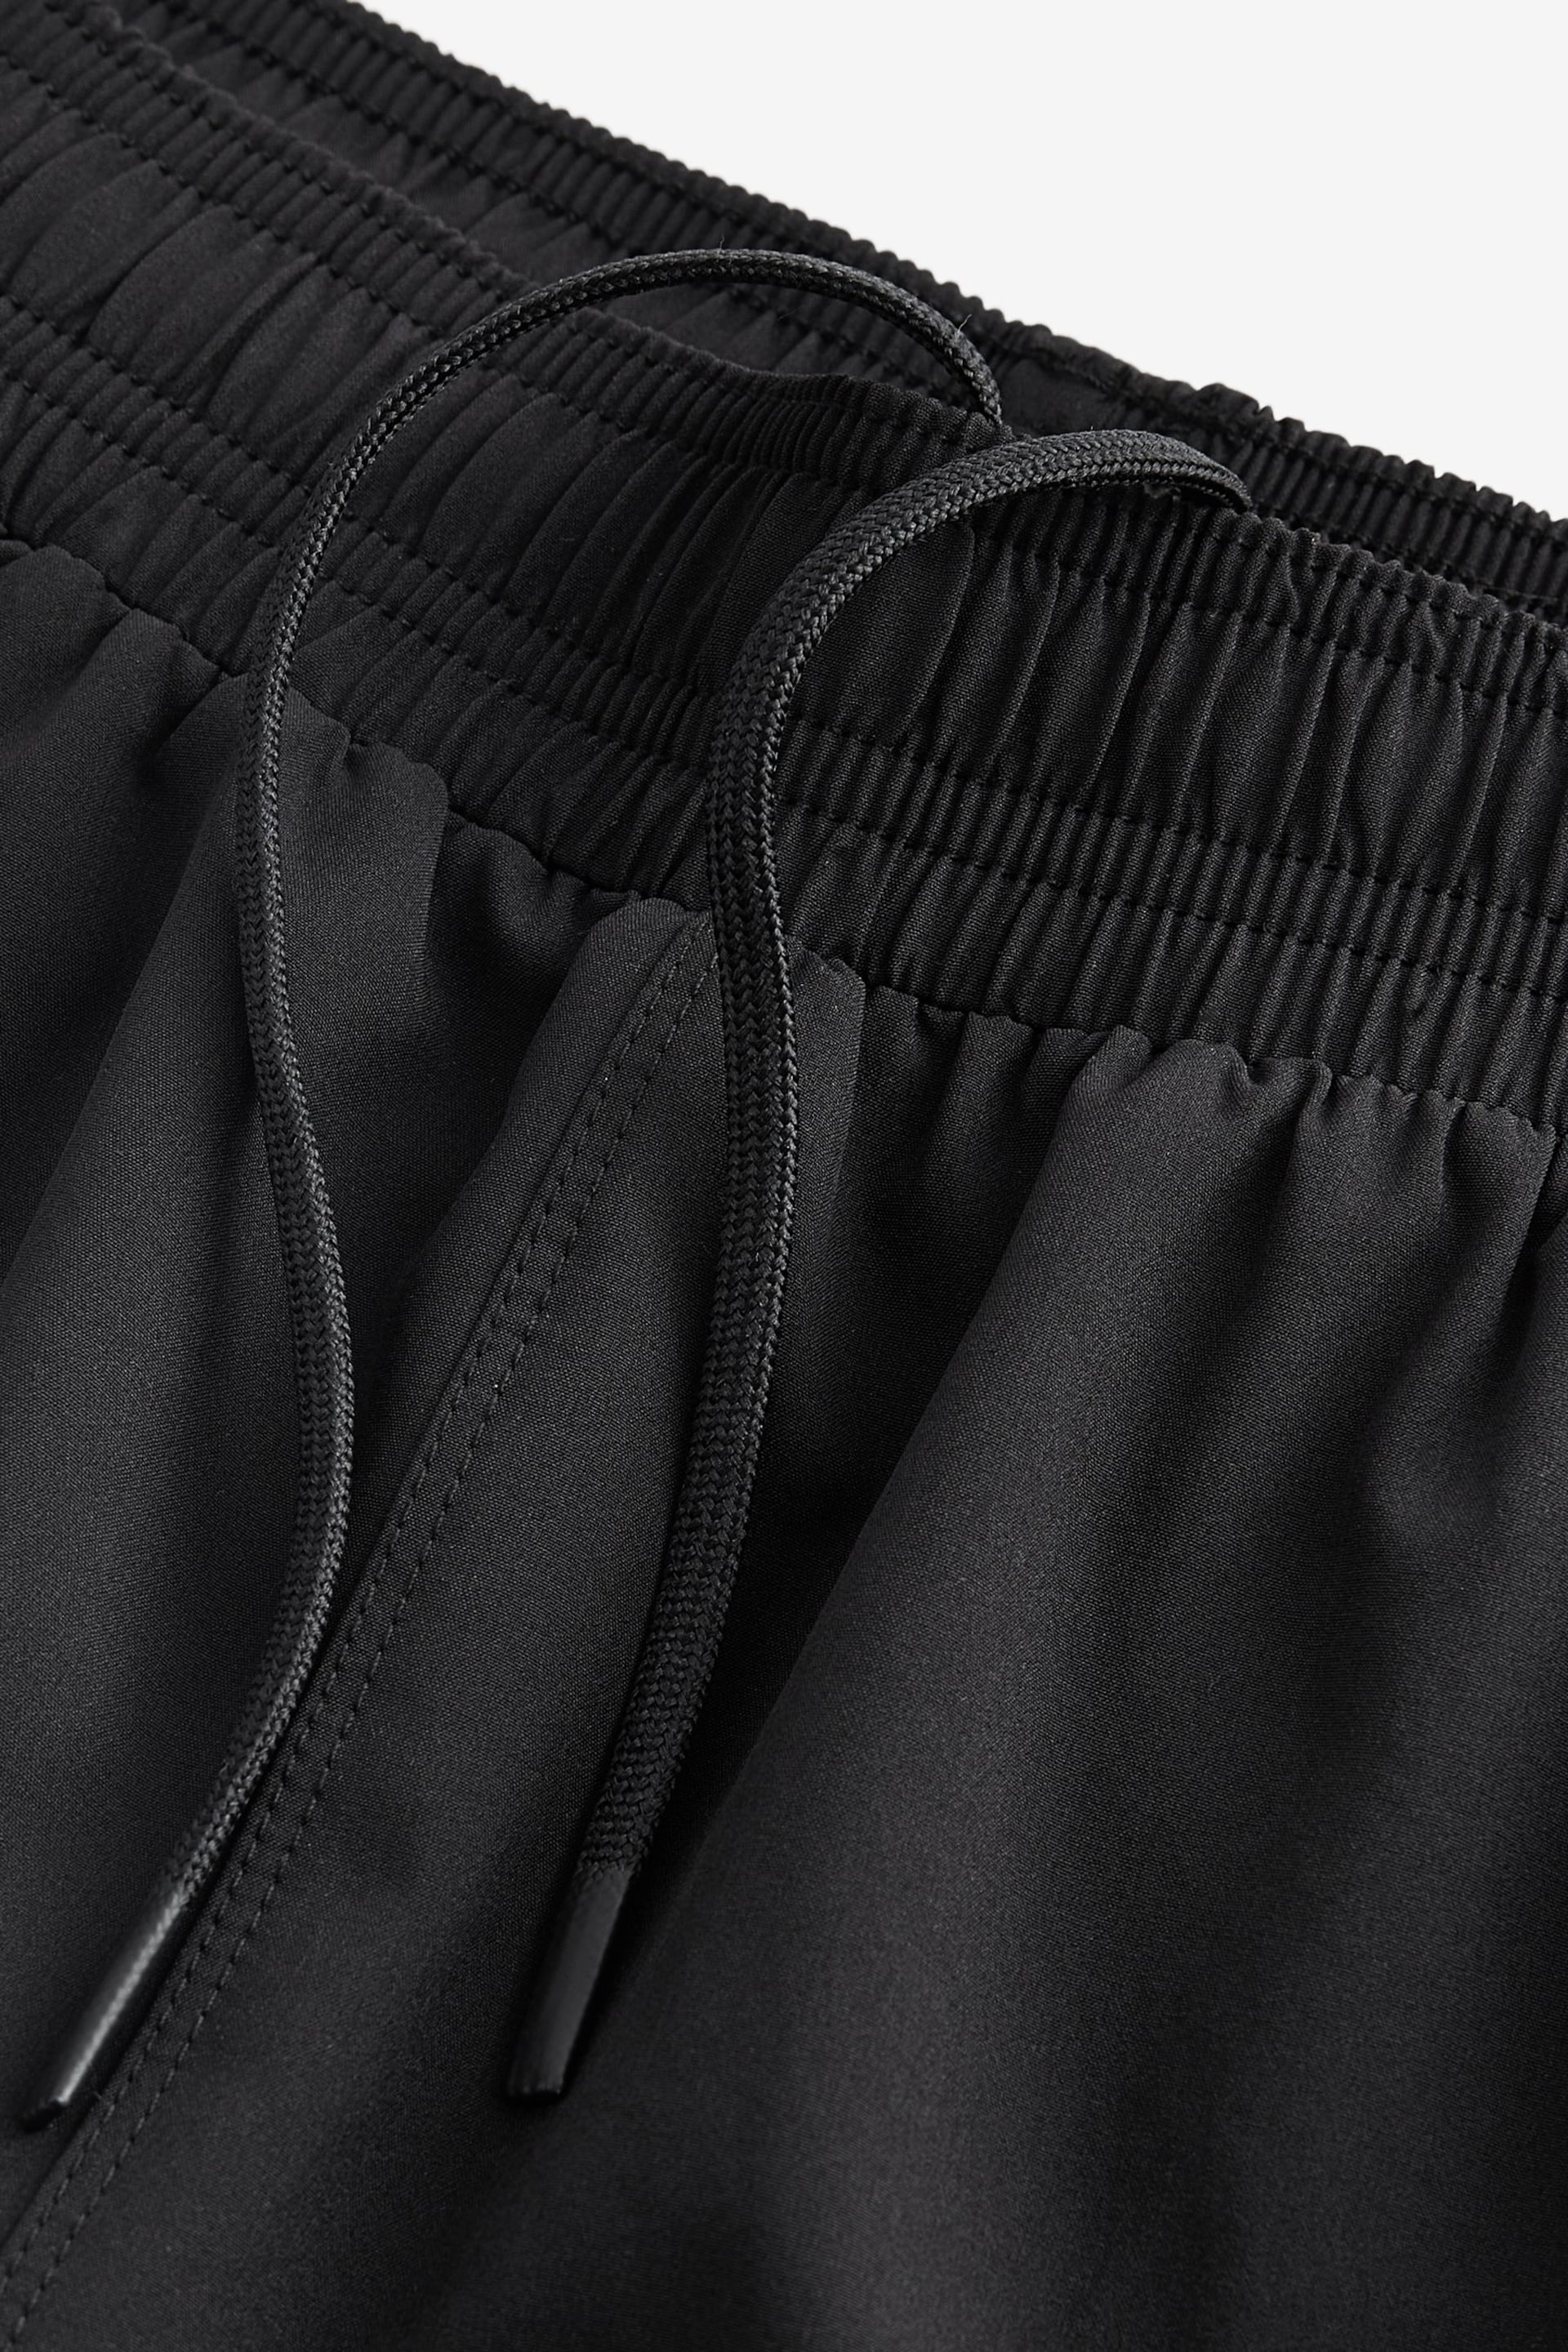 Black Training Shorts With Liner - Image 10 of 11